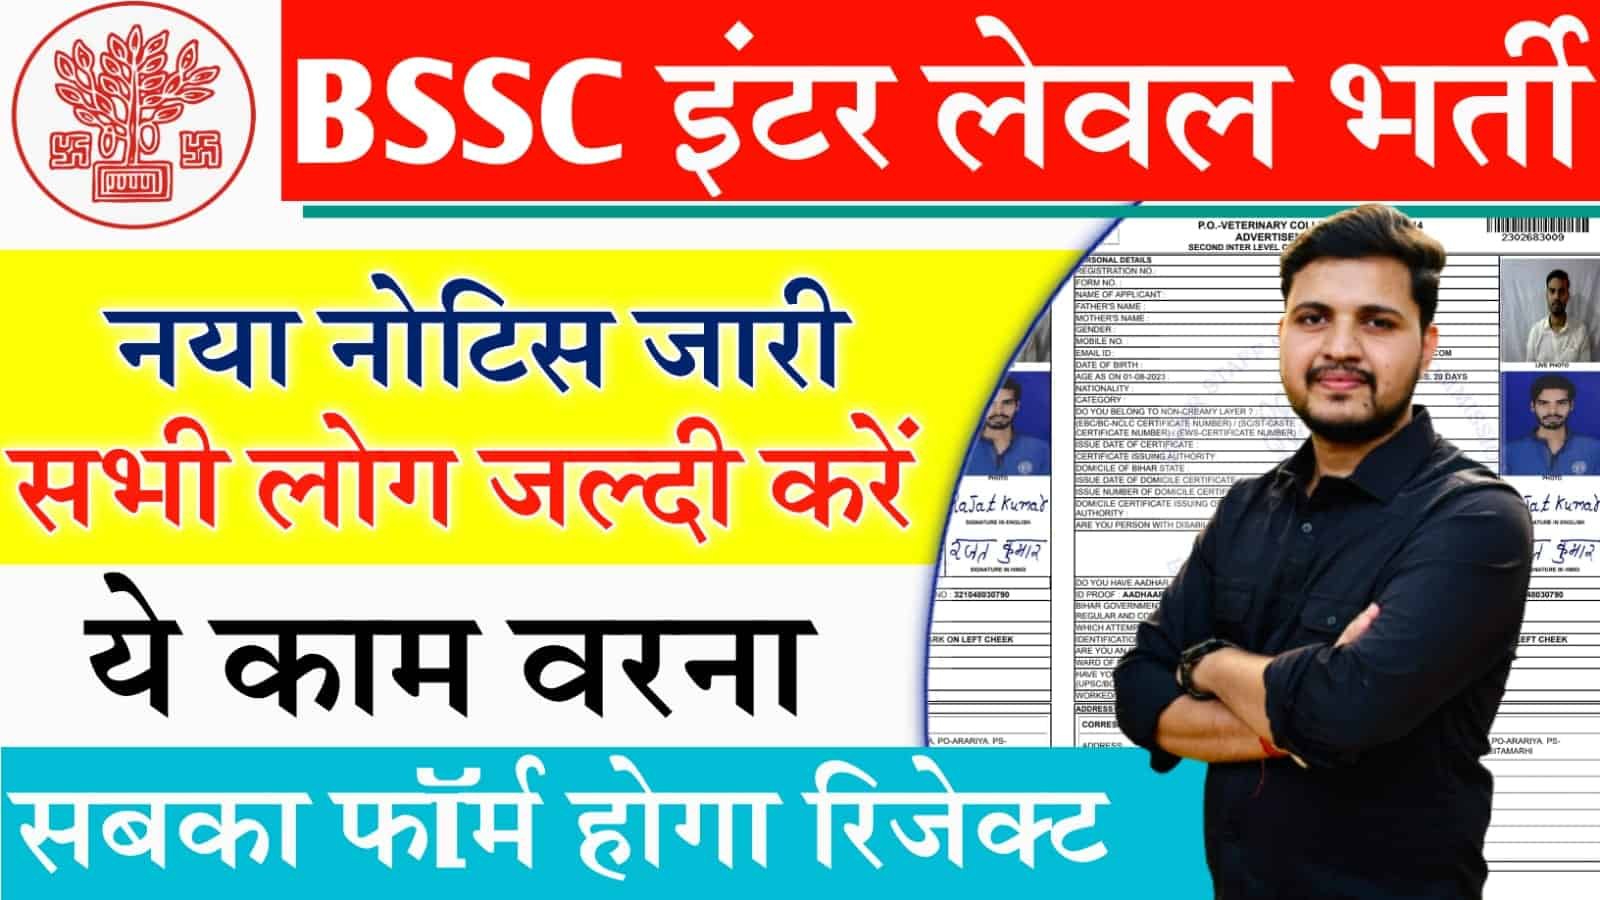 Ready go to ... https://onlineupdatestm.in/bssc-inter-level-vacancy-documents-upload-kaise-kare/ [ BSSC Inter Level Vacancy Documents Upload Kaise Kare]